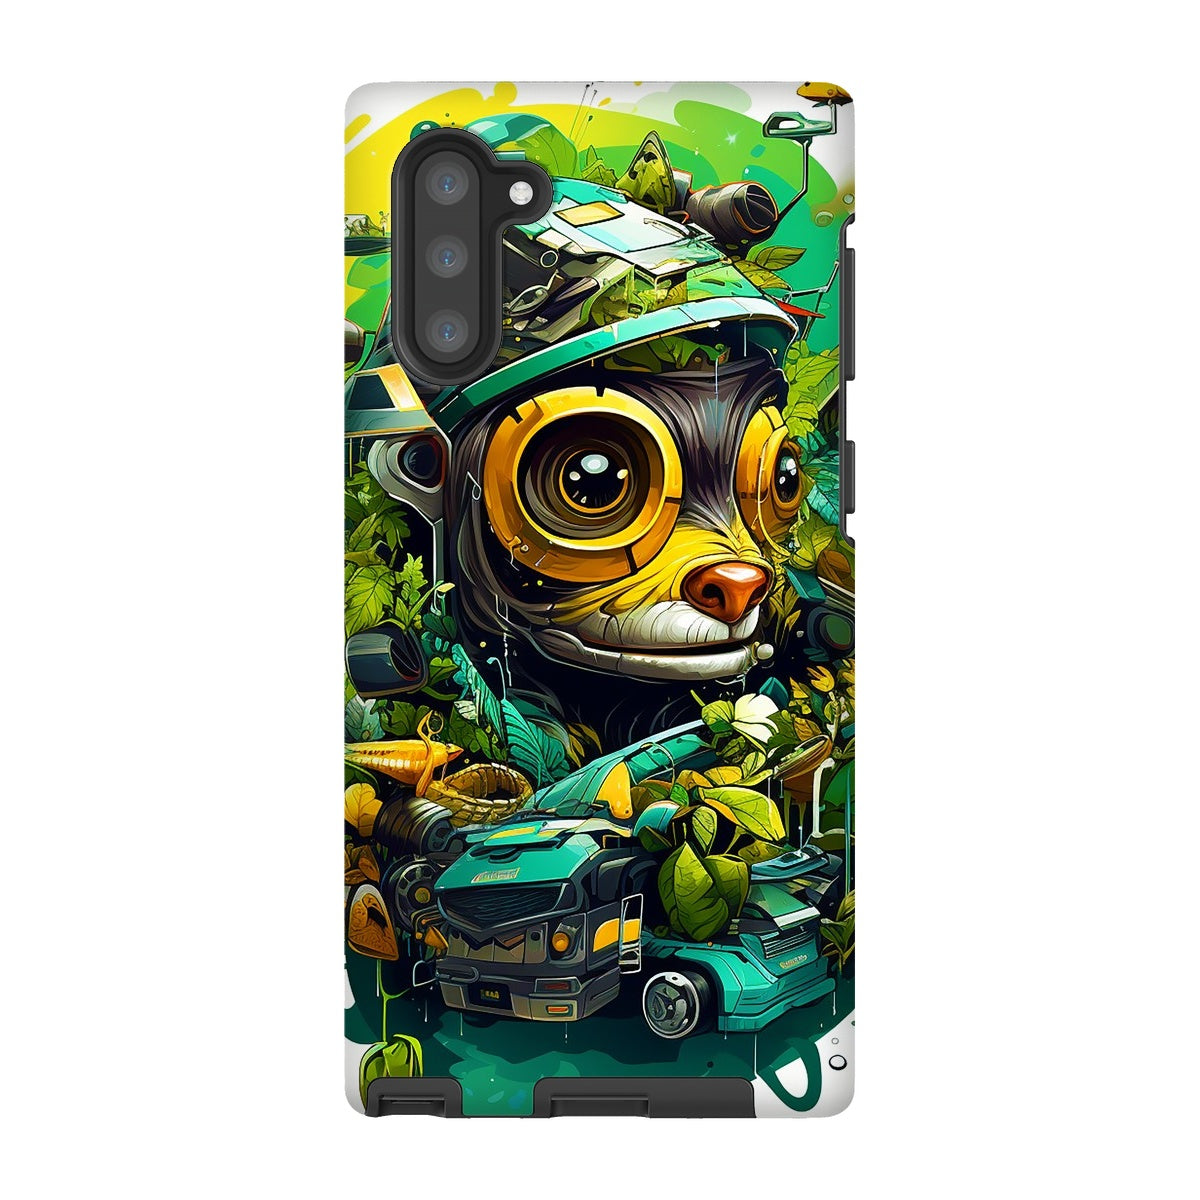 Nature's Resilience: Surreal Auto-Forest Artwork - Whimsical Raccoon and Greenery Infused Car  Tough Phone Case